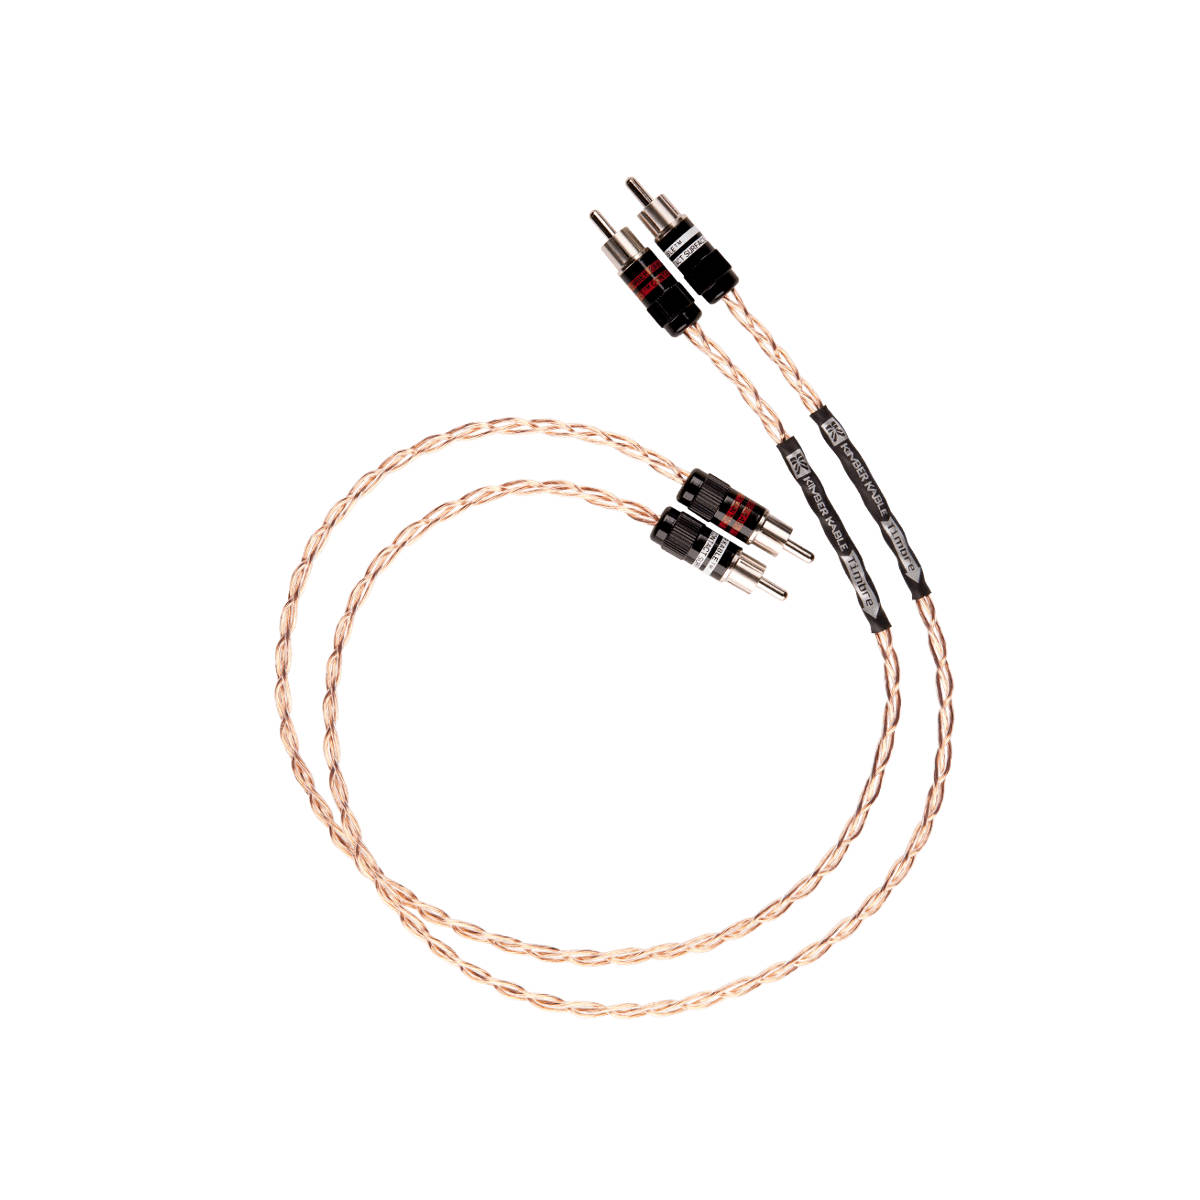 Kimber Kable Base Series TIMBRE RCA / XLR Interconnect Cable (1.0M / 1.5M/ 2M) - Ooberpad